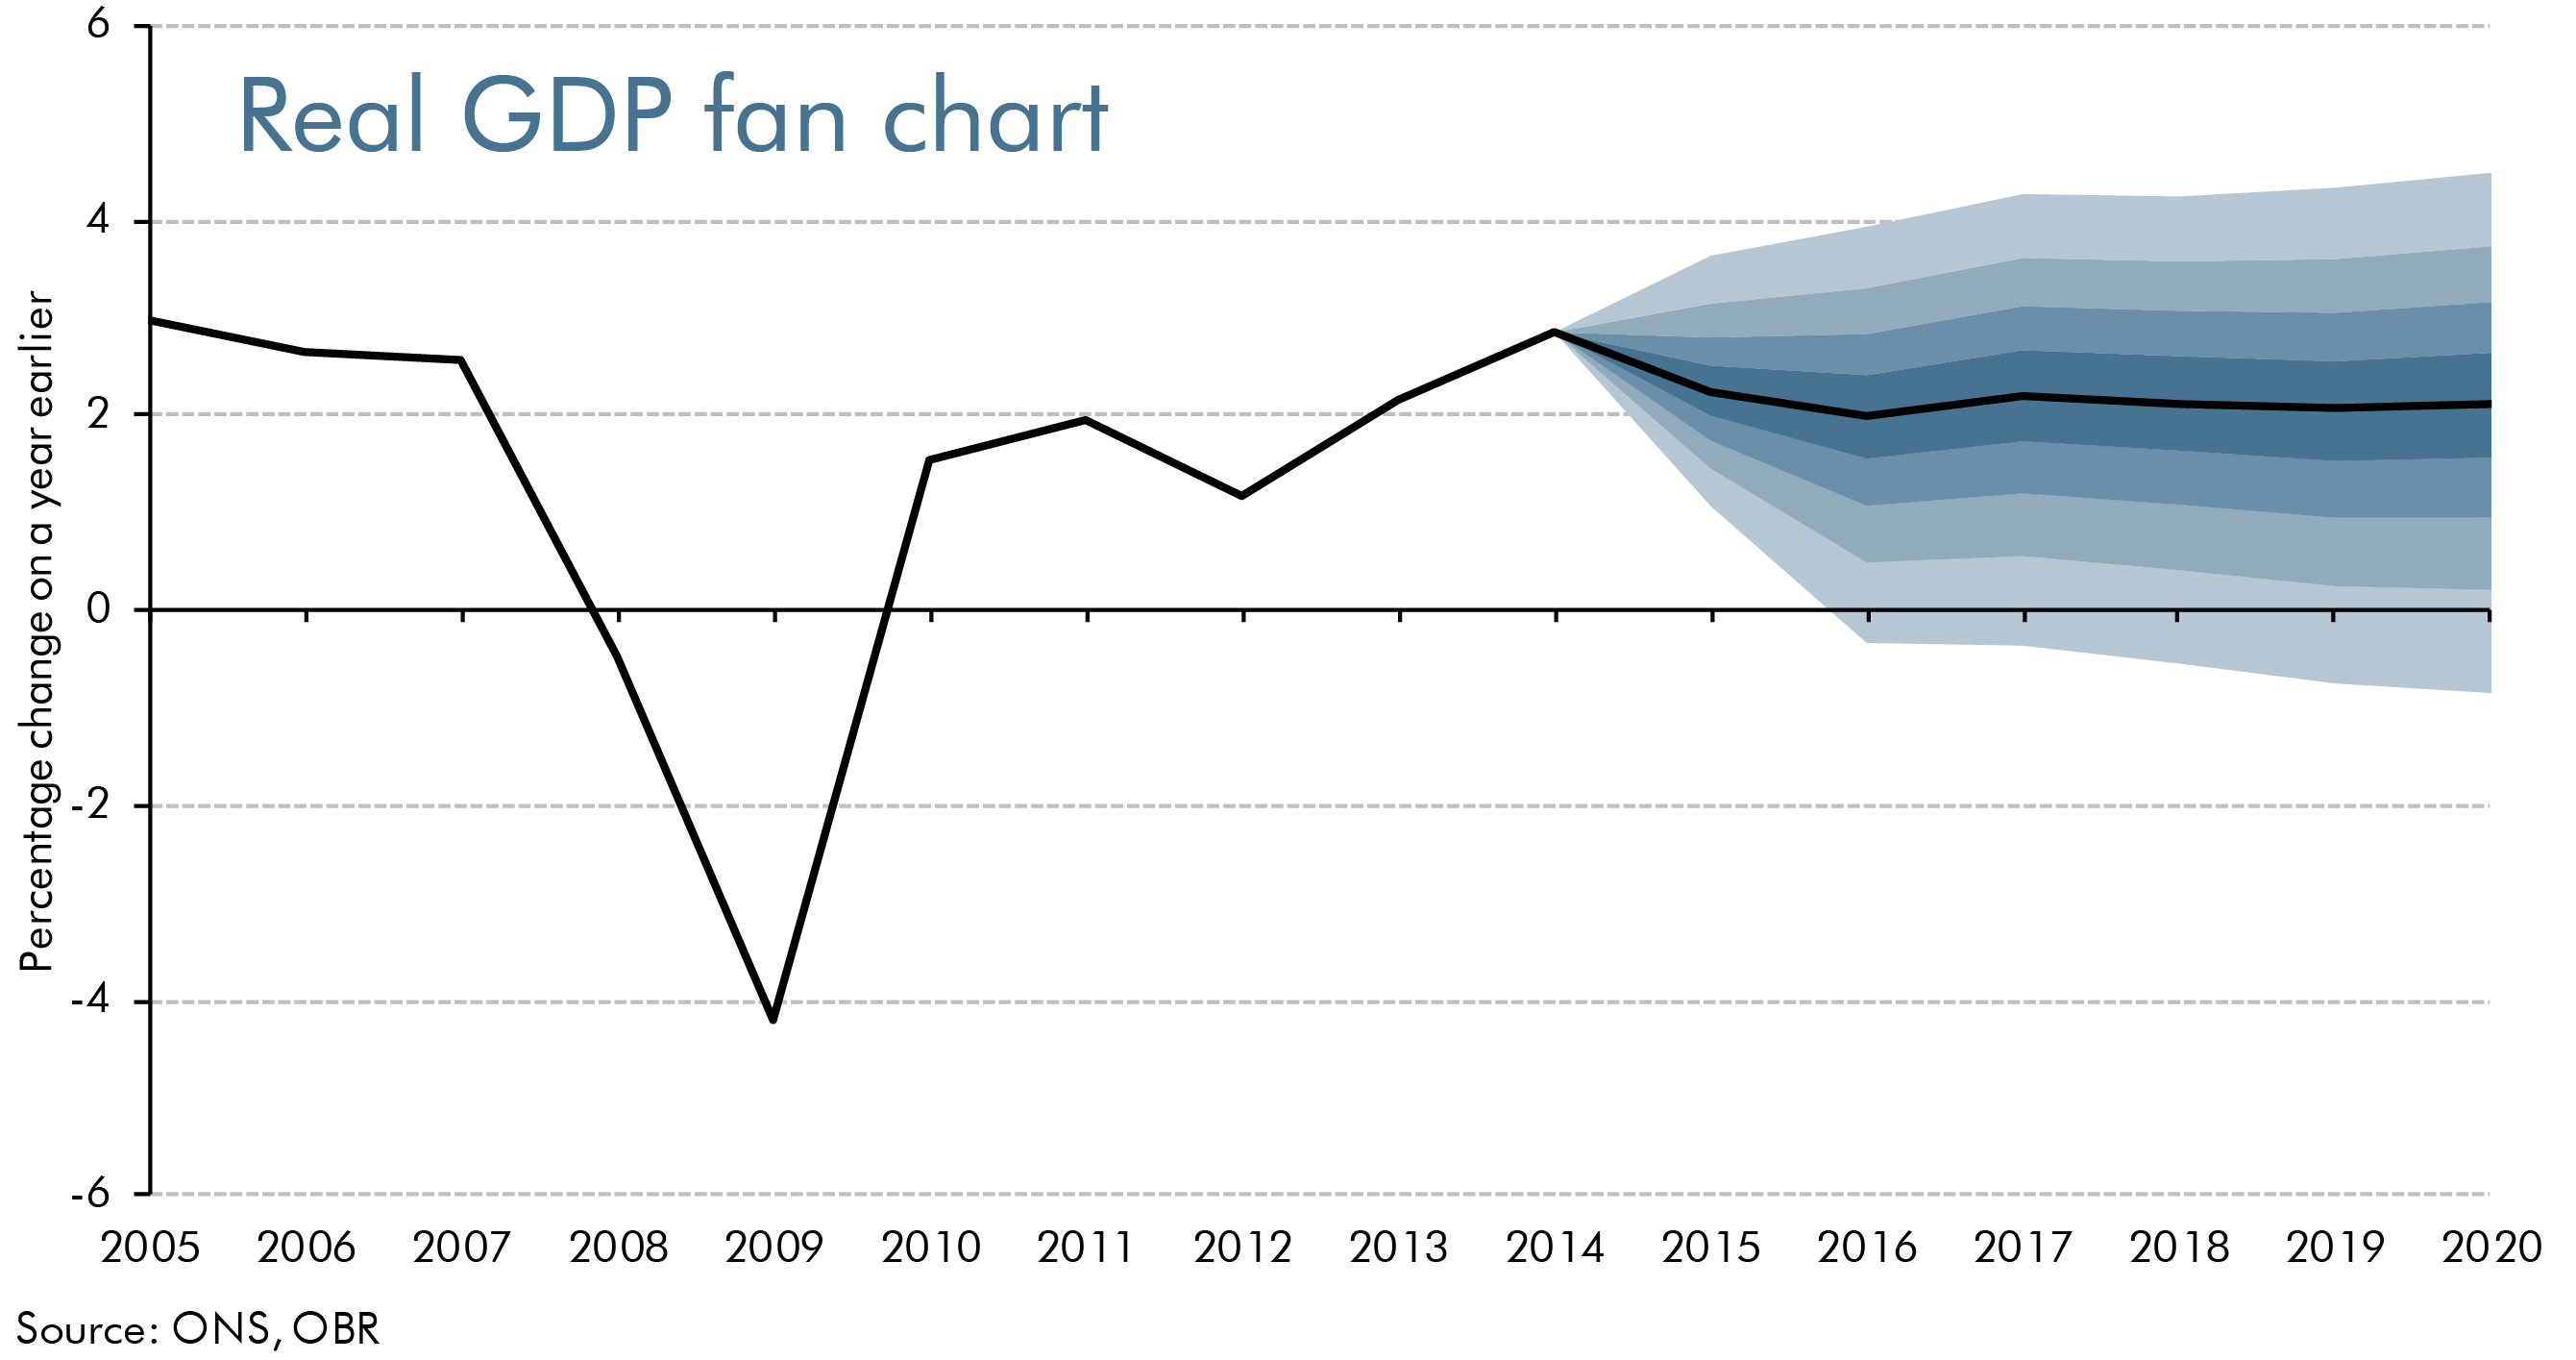 real GDP growth fan chart